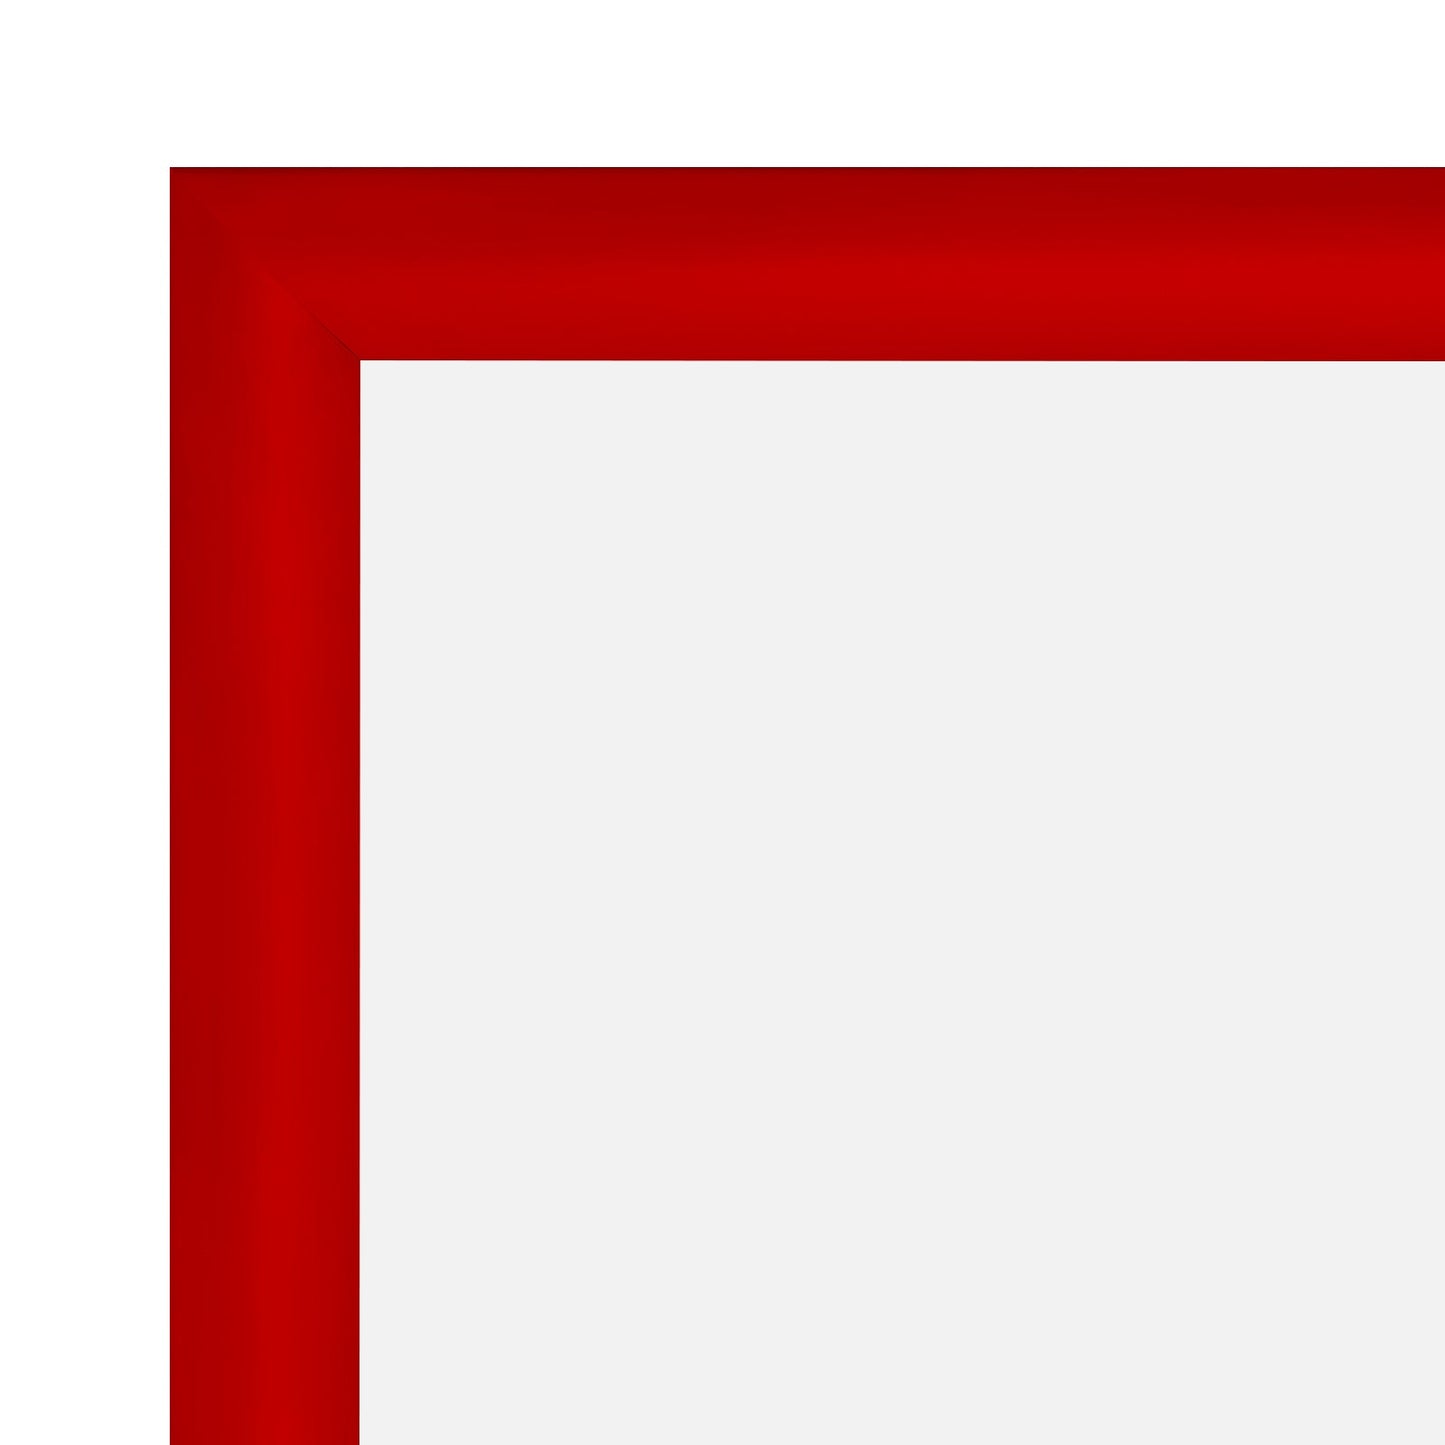 36x36  TRADEframe Red Snap Frame 36x36 - 1.2 inch profile - Snap Frames Direct